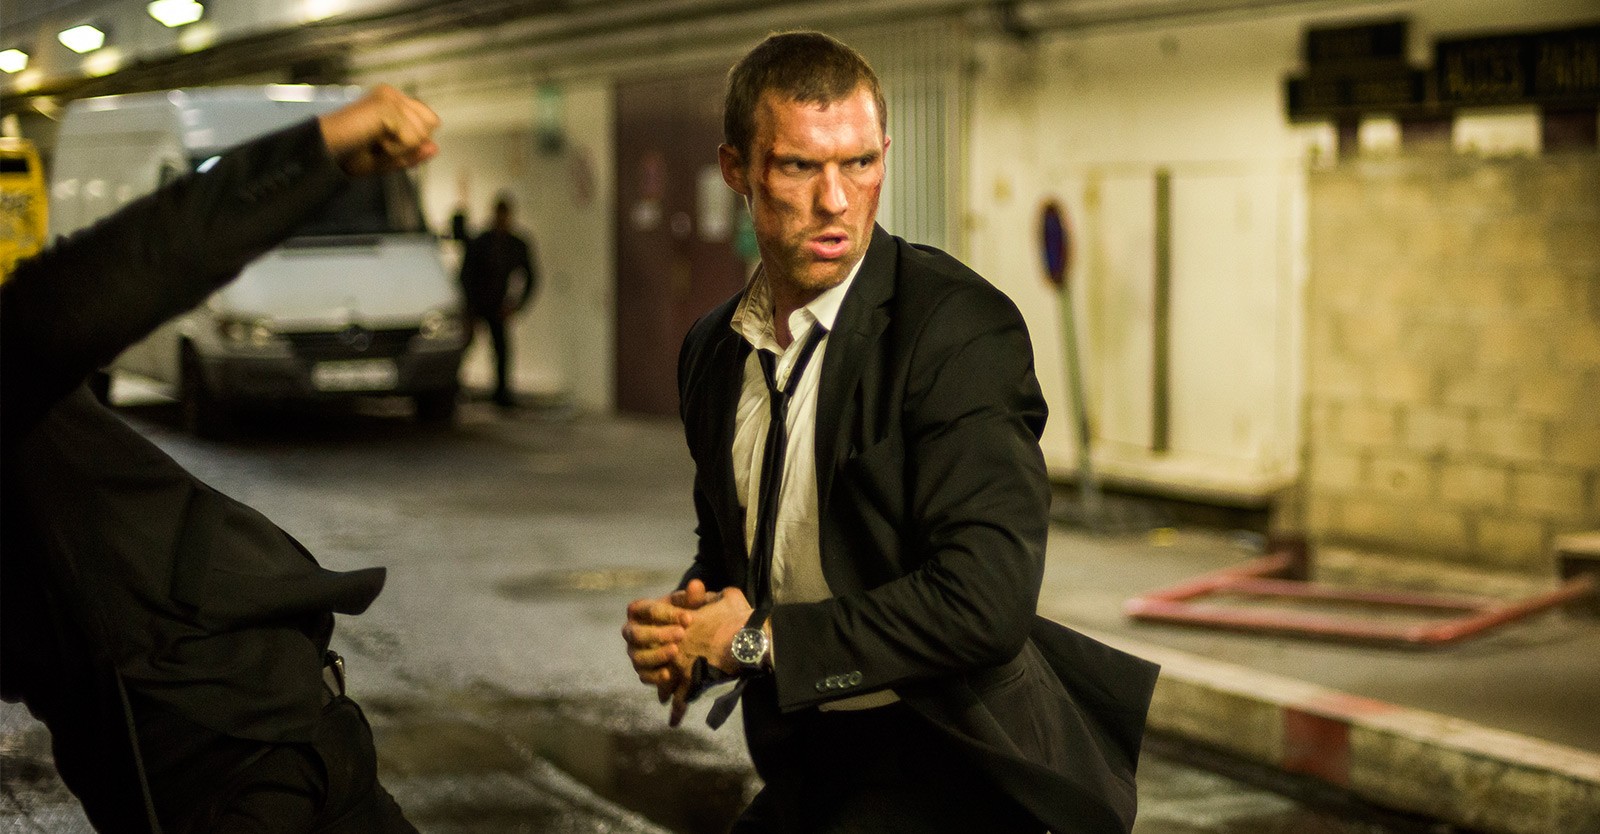 The Transporter Refueled Backgrounds, Compatible - PC, Mobile, Gadgets| 1600x834 px